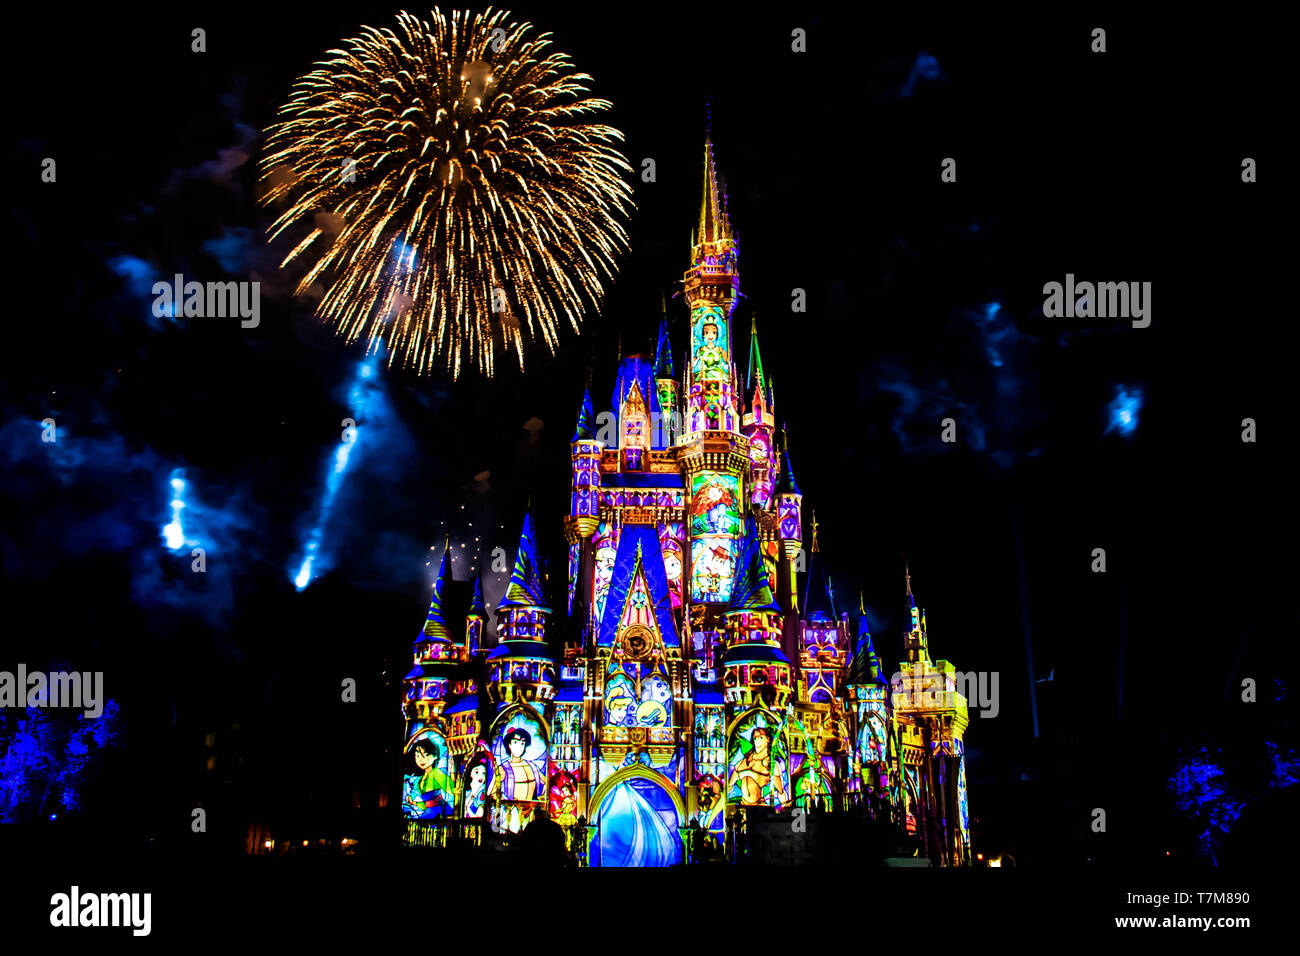 Orlando Florida April 02 19 Happily Ever After Is Spectacular Fireworks Show At Cinderella S Castle In Magic Kingdom 21 Stock Photo Alamy